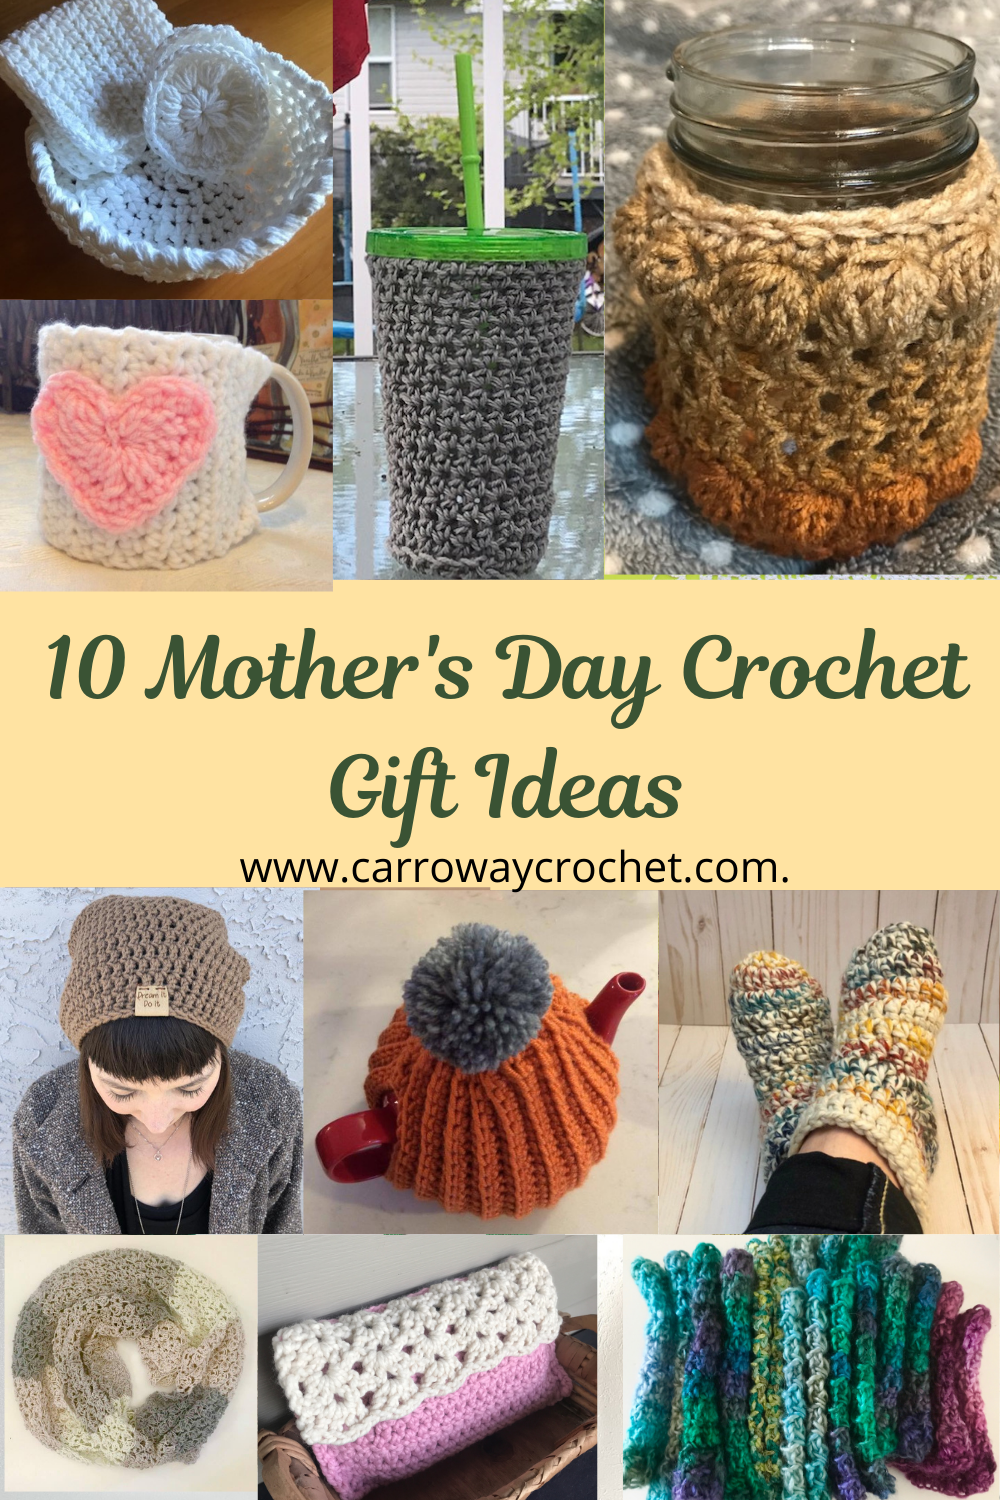 Quick and Easy Crocheted Mother's Day Gifts — Day's Crochet & Knit